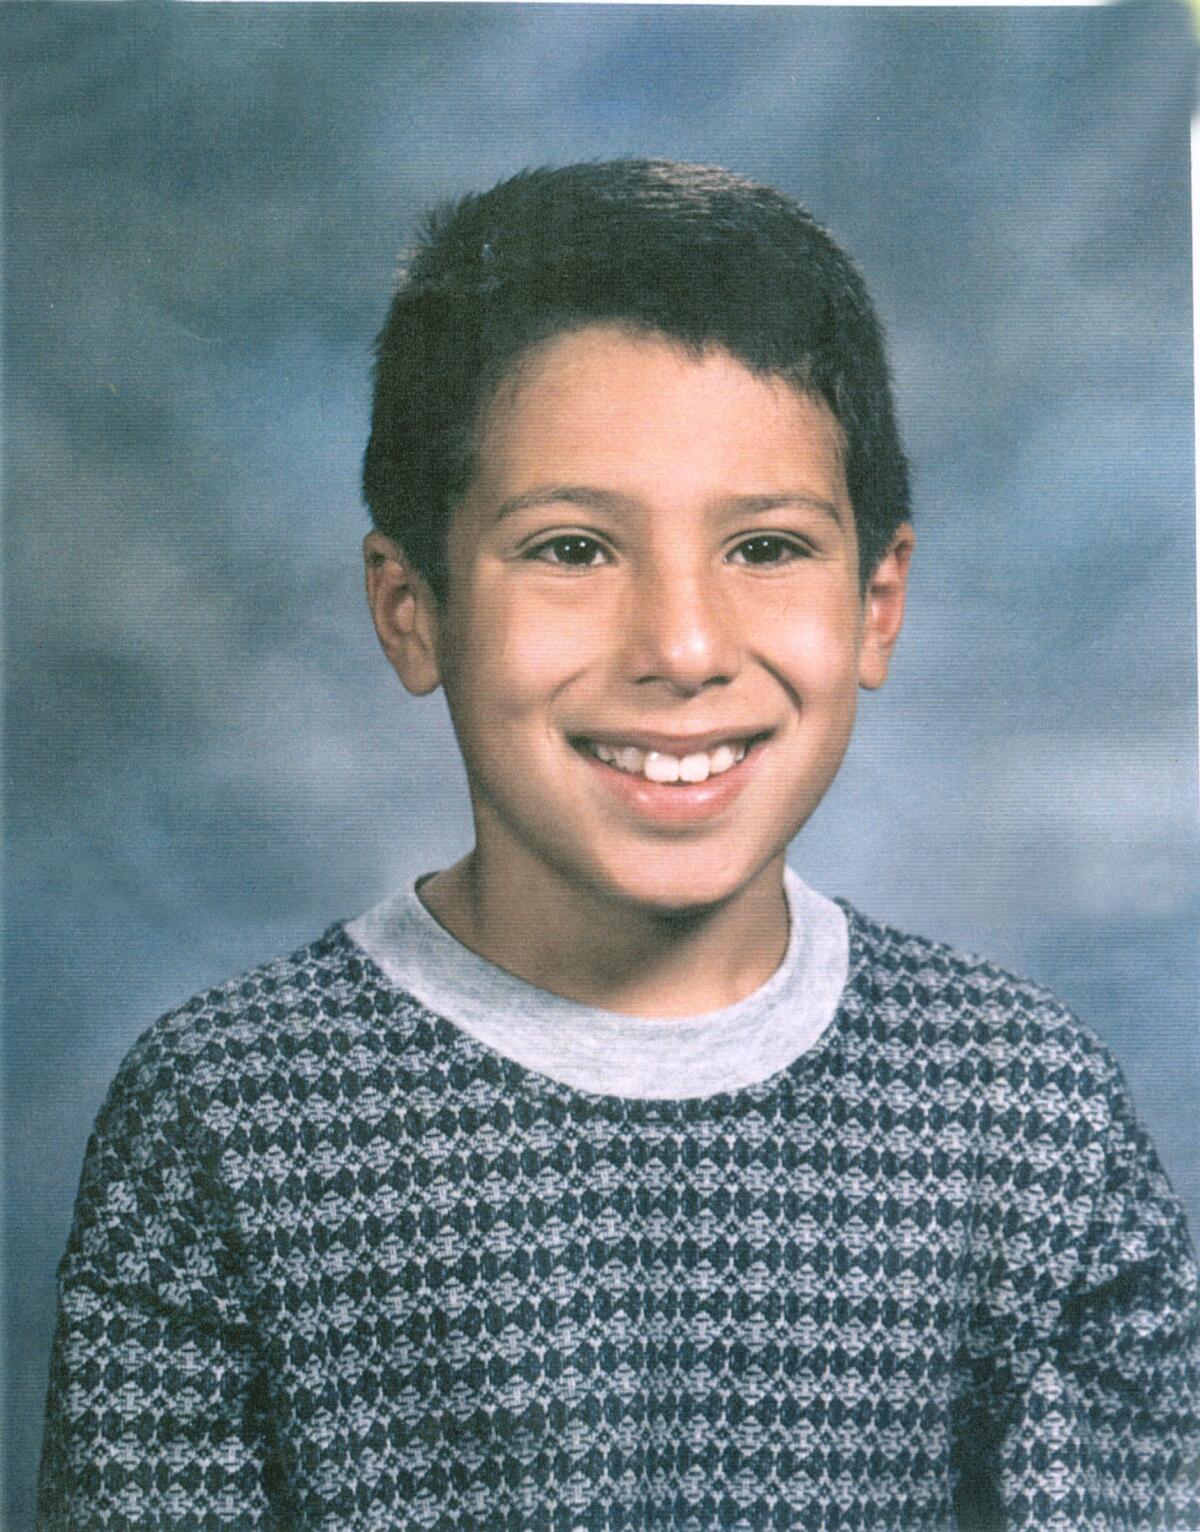 Anthony Martinez was abducted and killed in 1997.